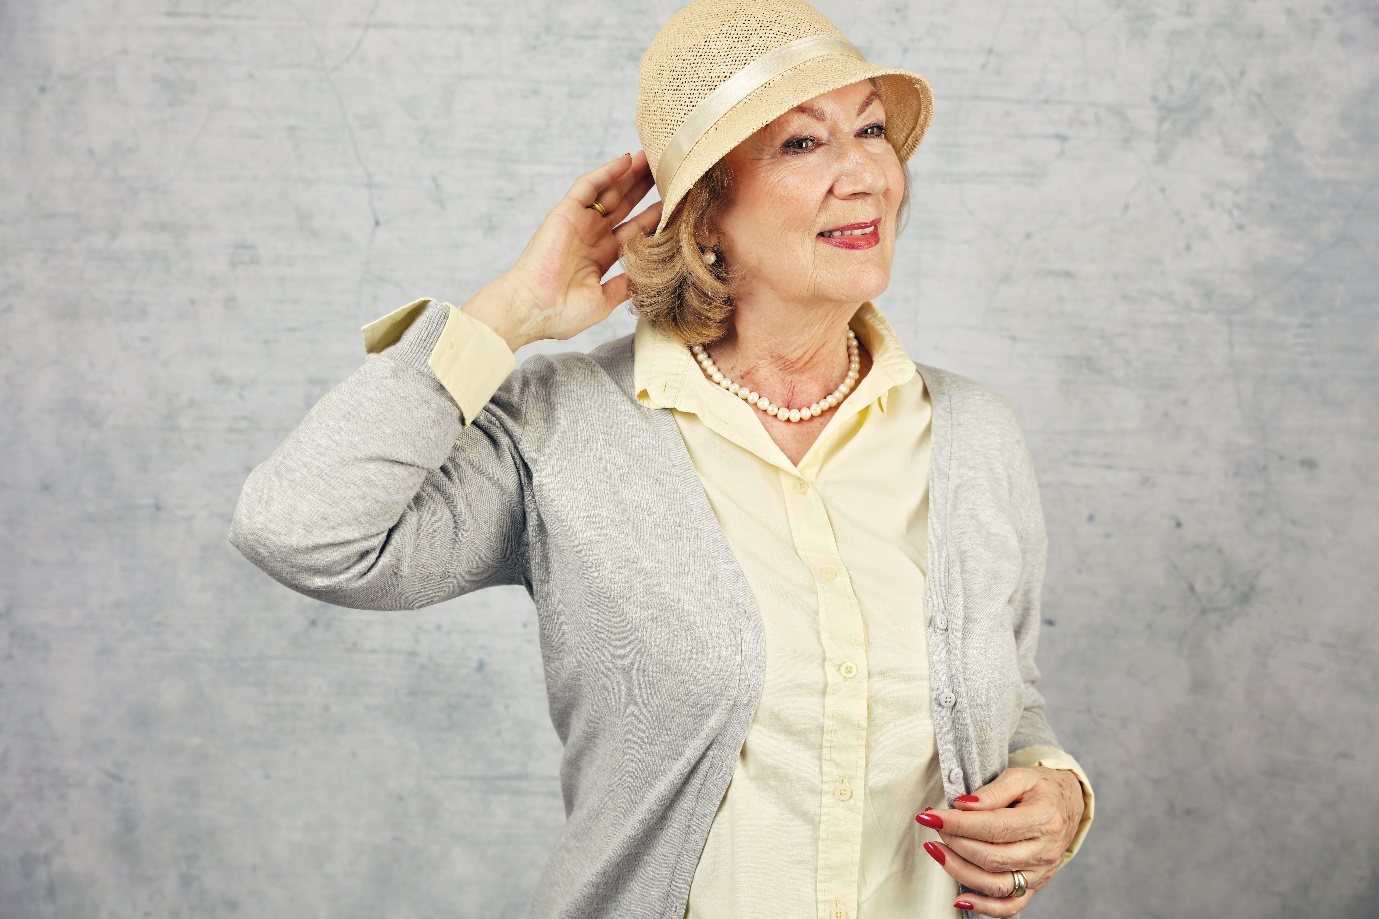 A senior wearing a luxurious outfit with a hat